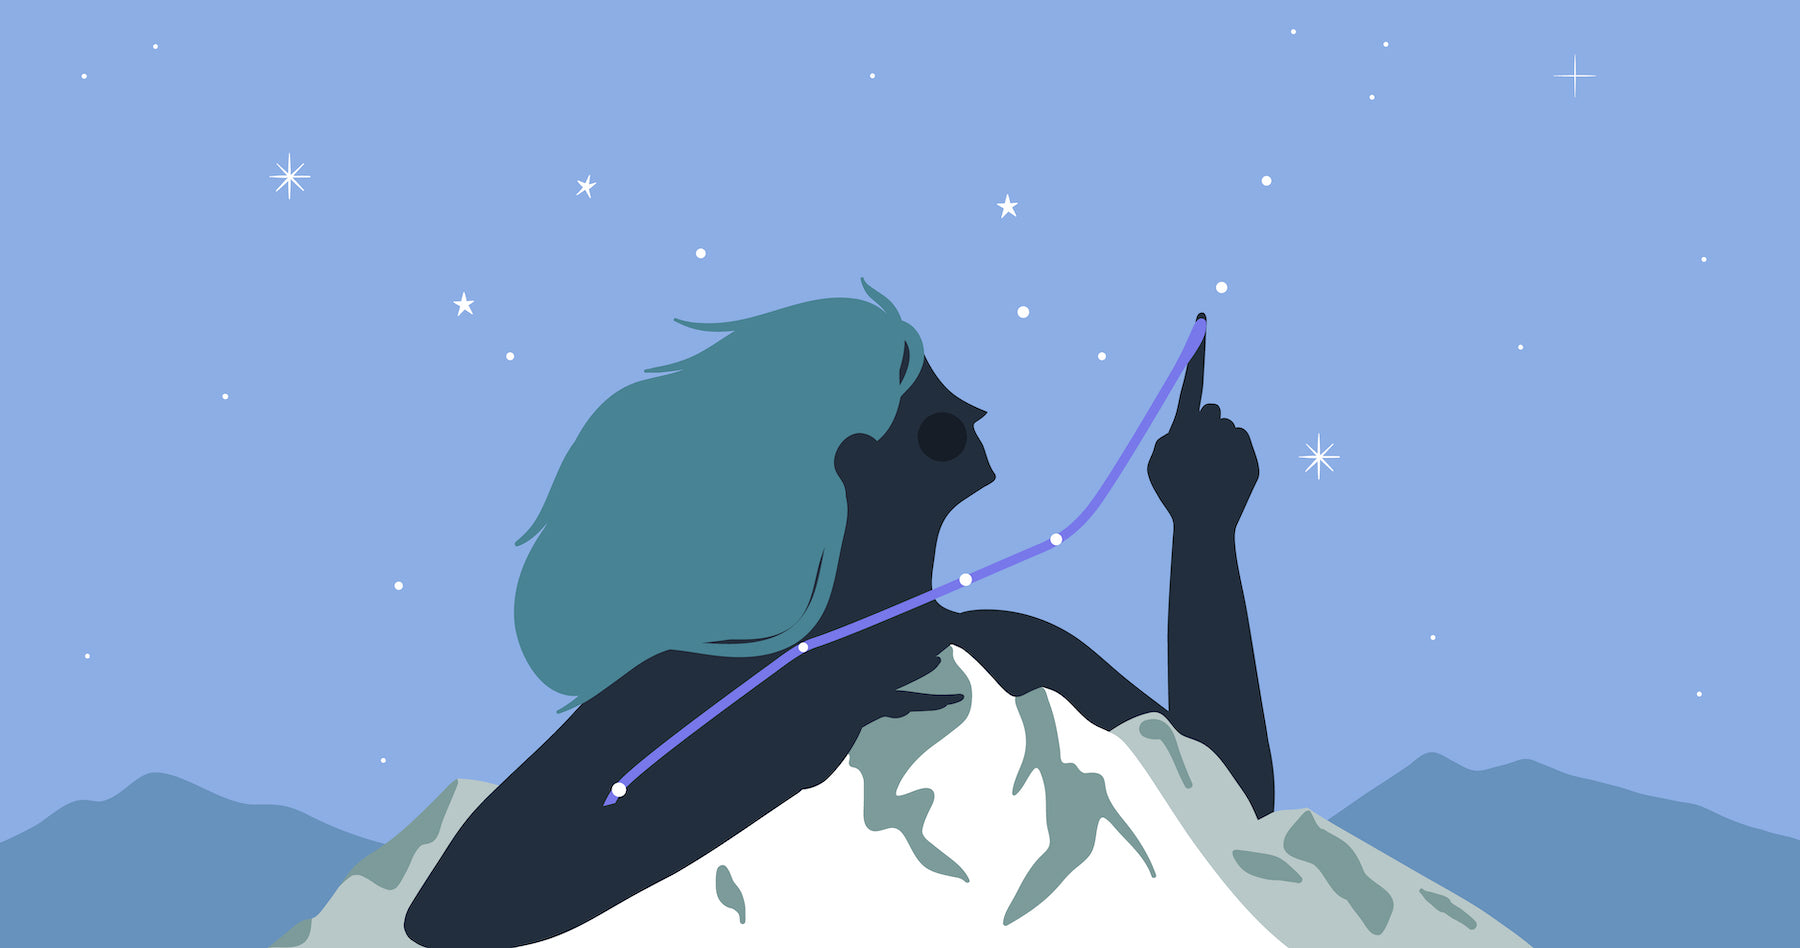 Illustration of a person leaning on a mountain and pointing at the stars